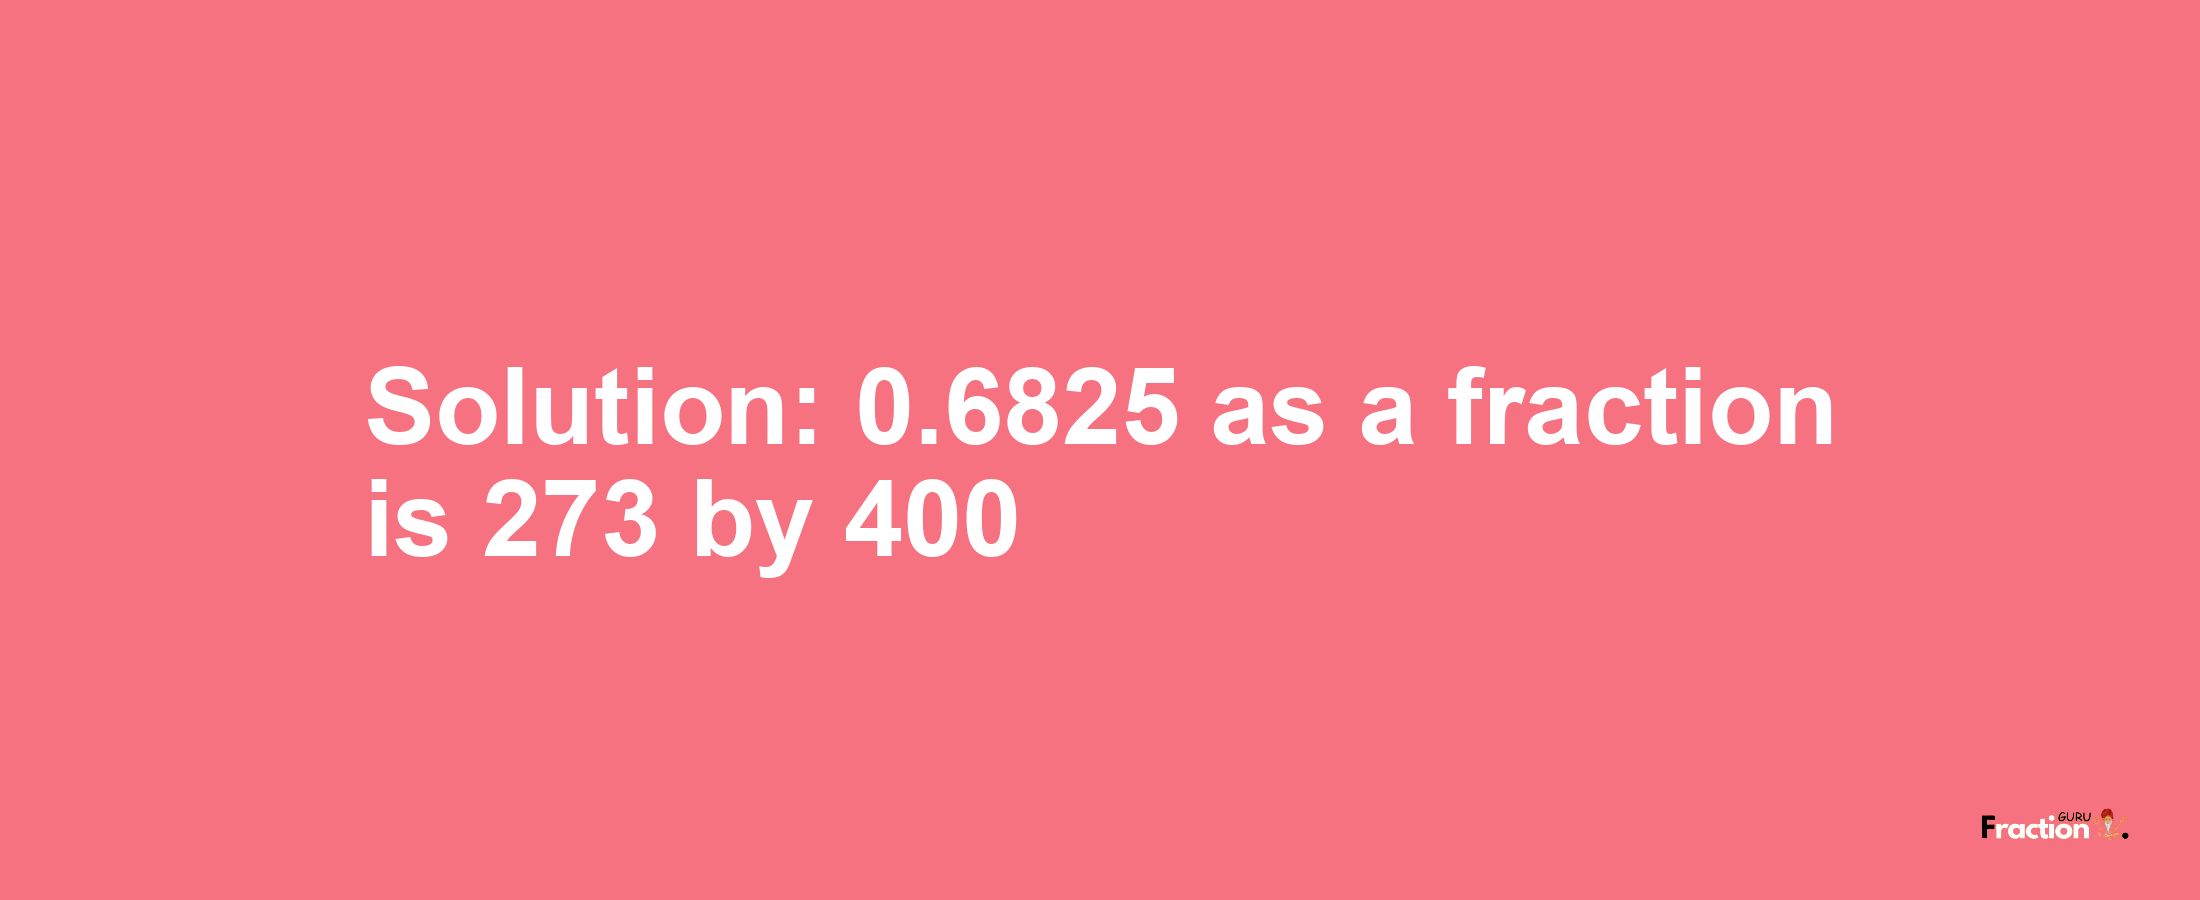 Solution:0.6825 as a fraction is 273/400